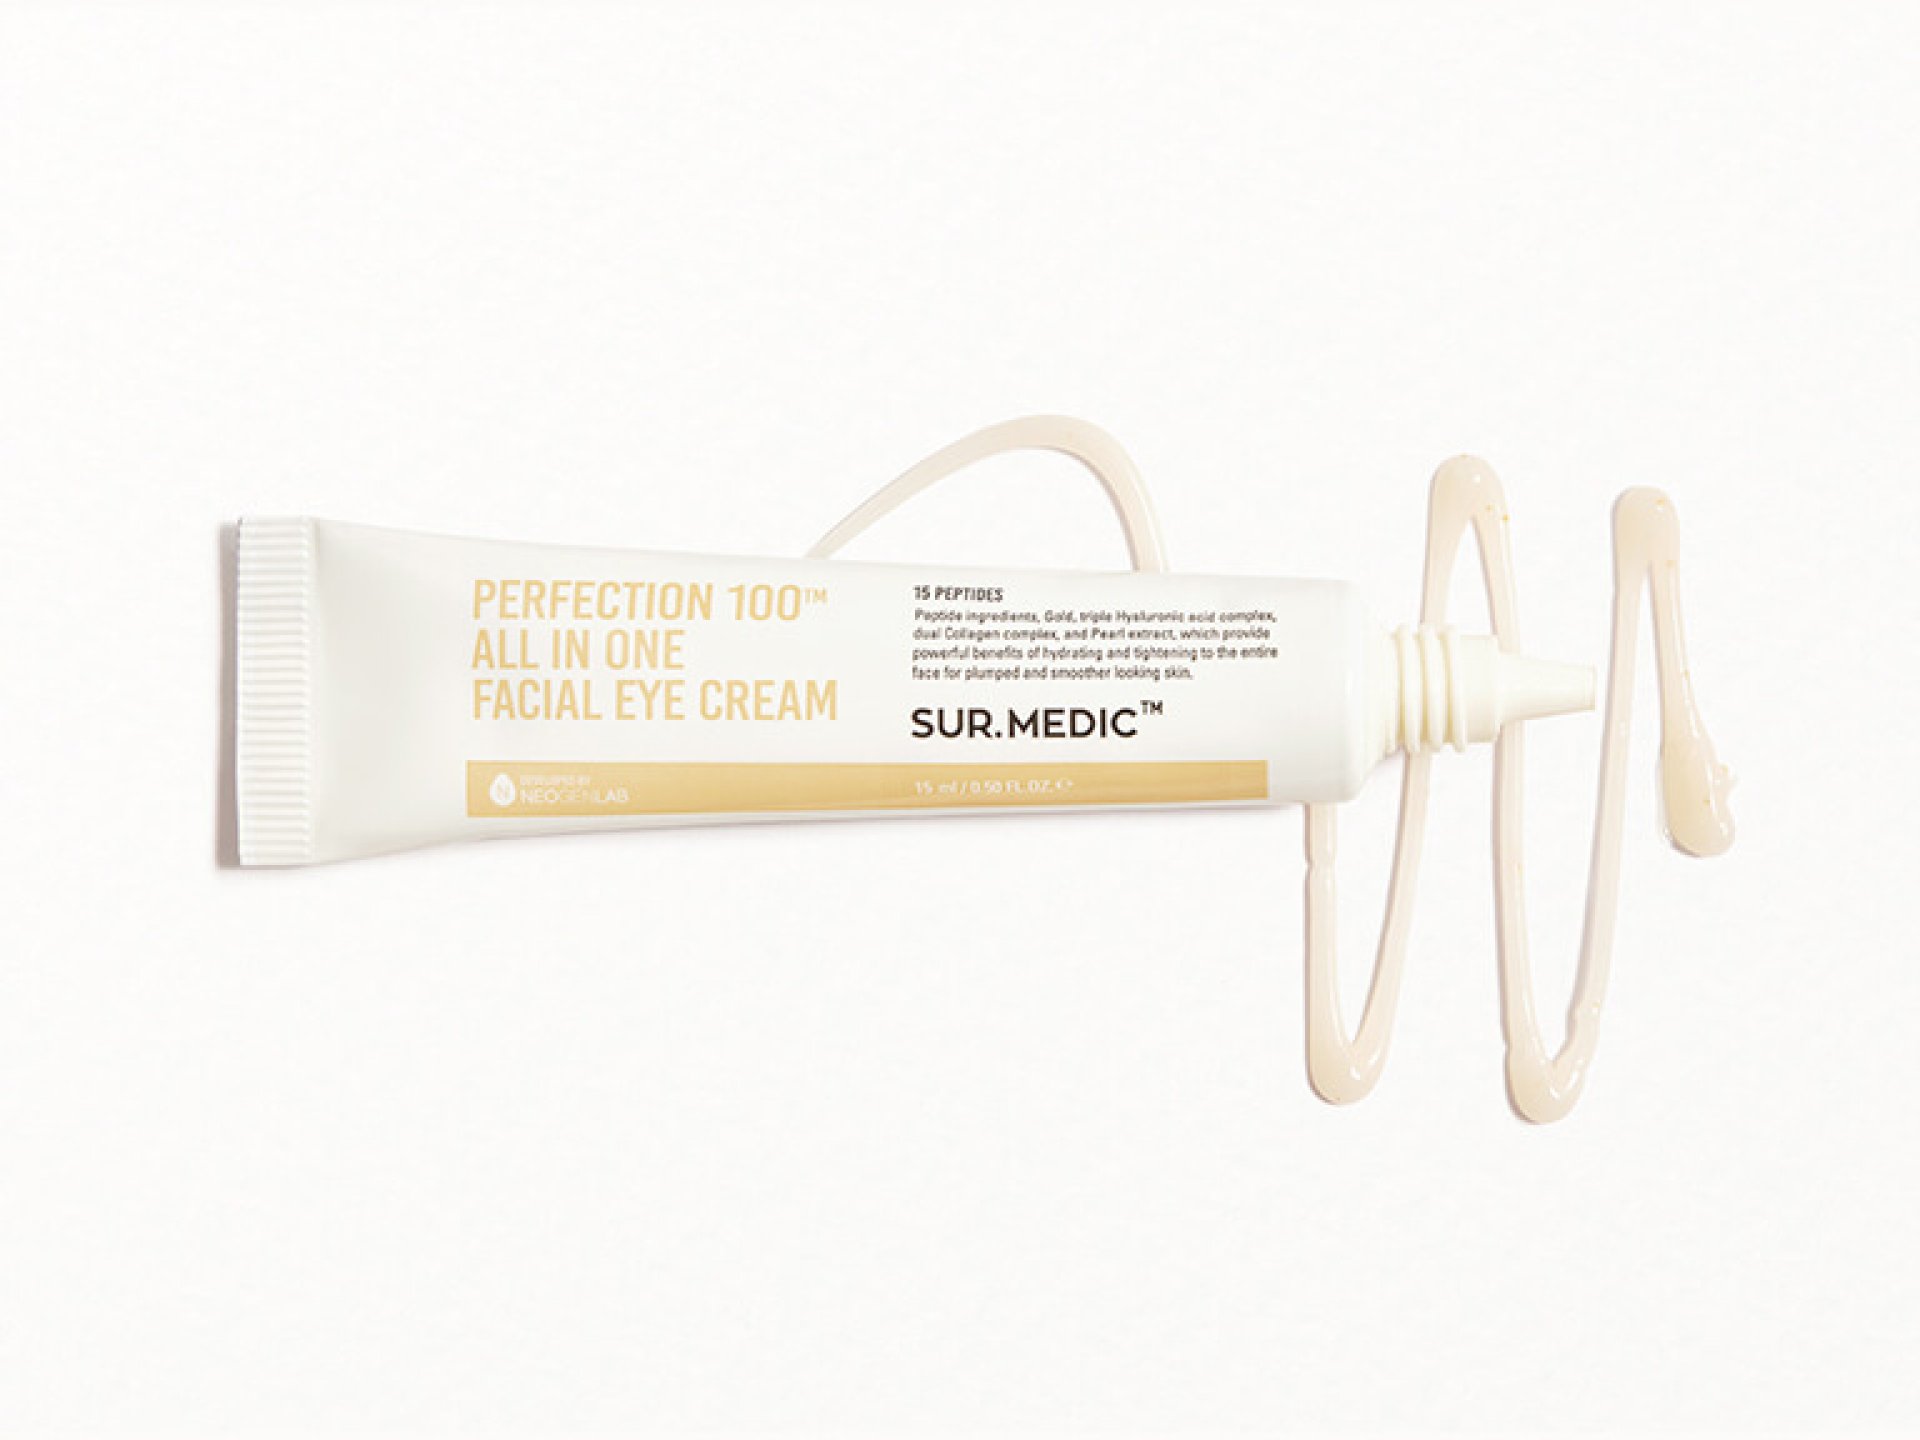 SUR.MEDIC+ Perfection 100™ All In One Facial Eye Cream